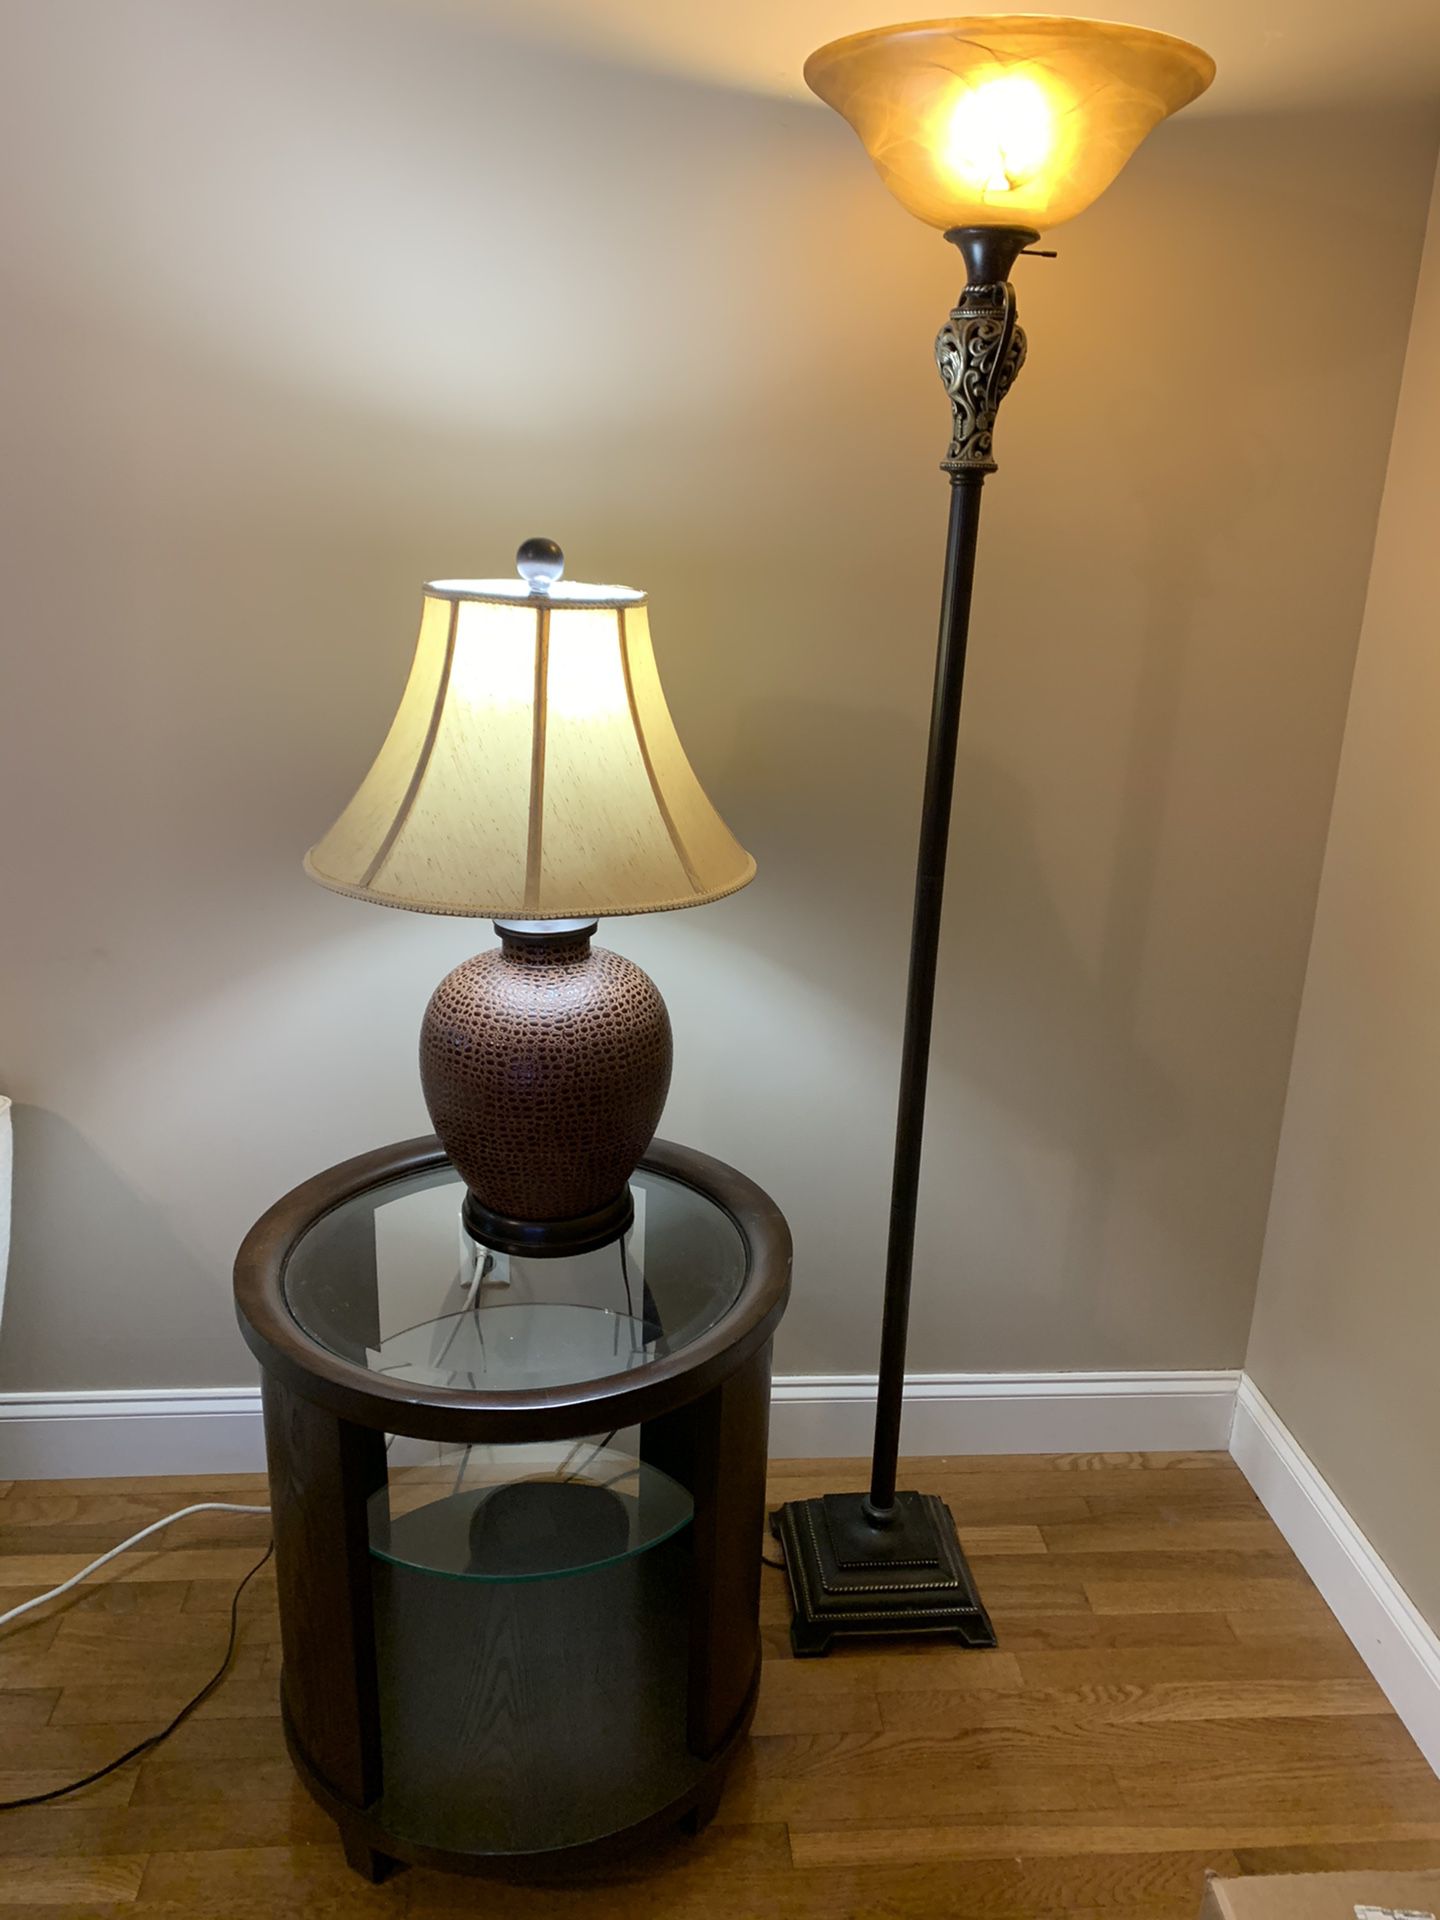 Lamps and end table